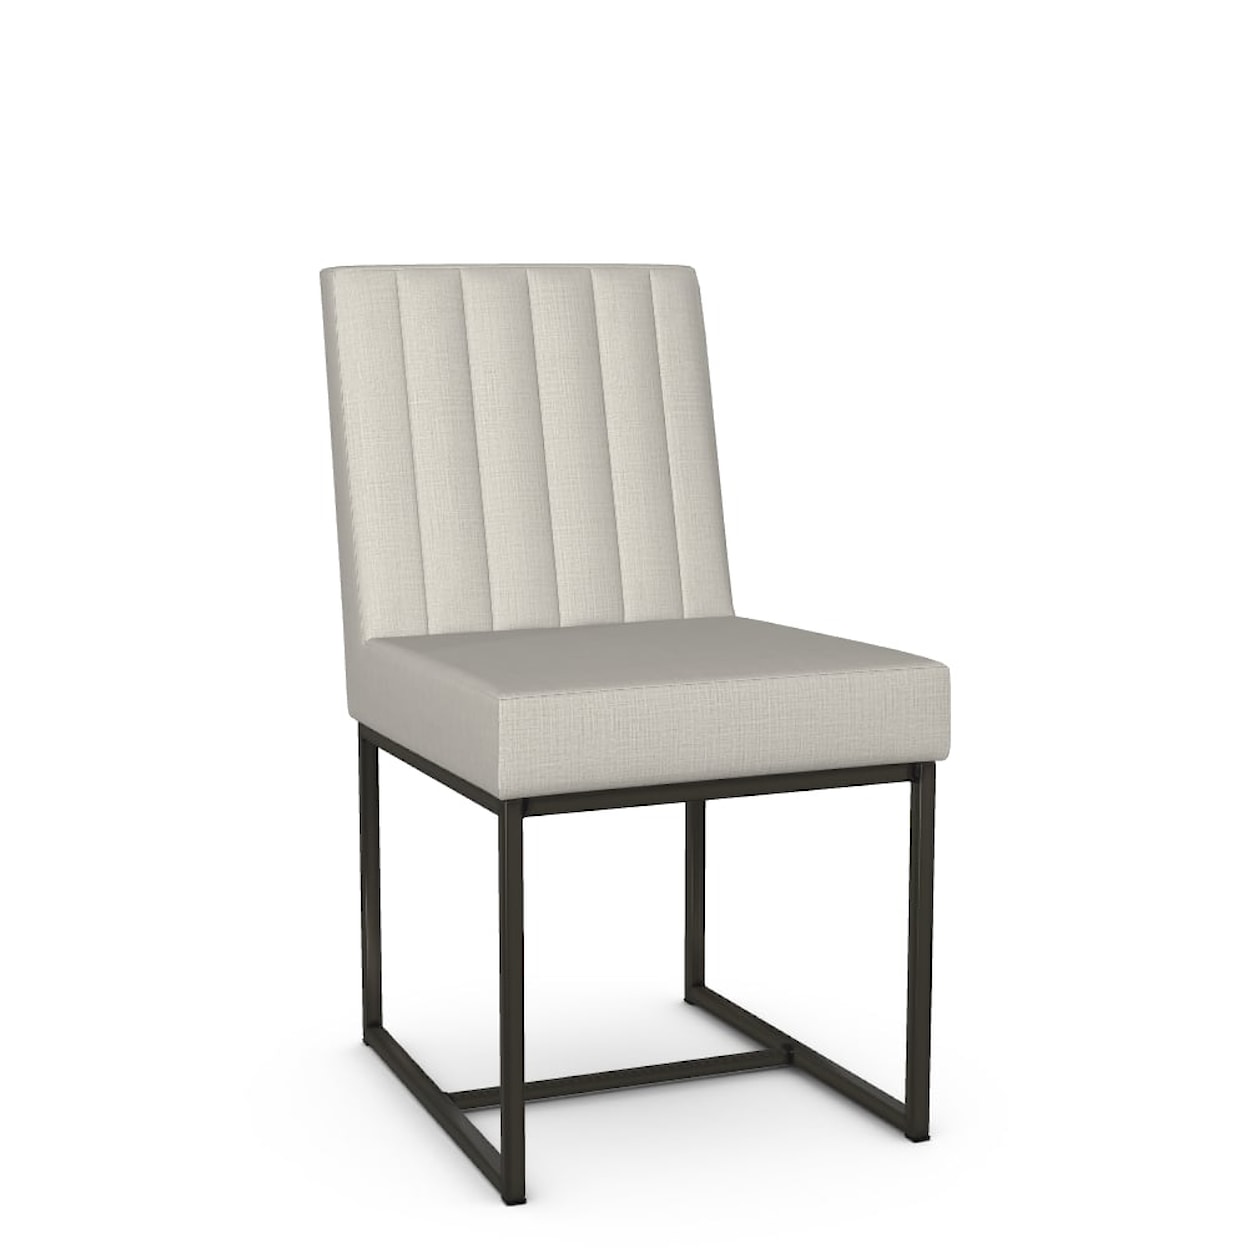 Amisco Darcy Chair